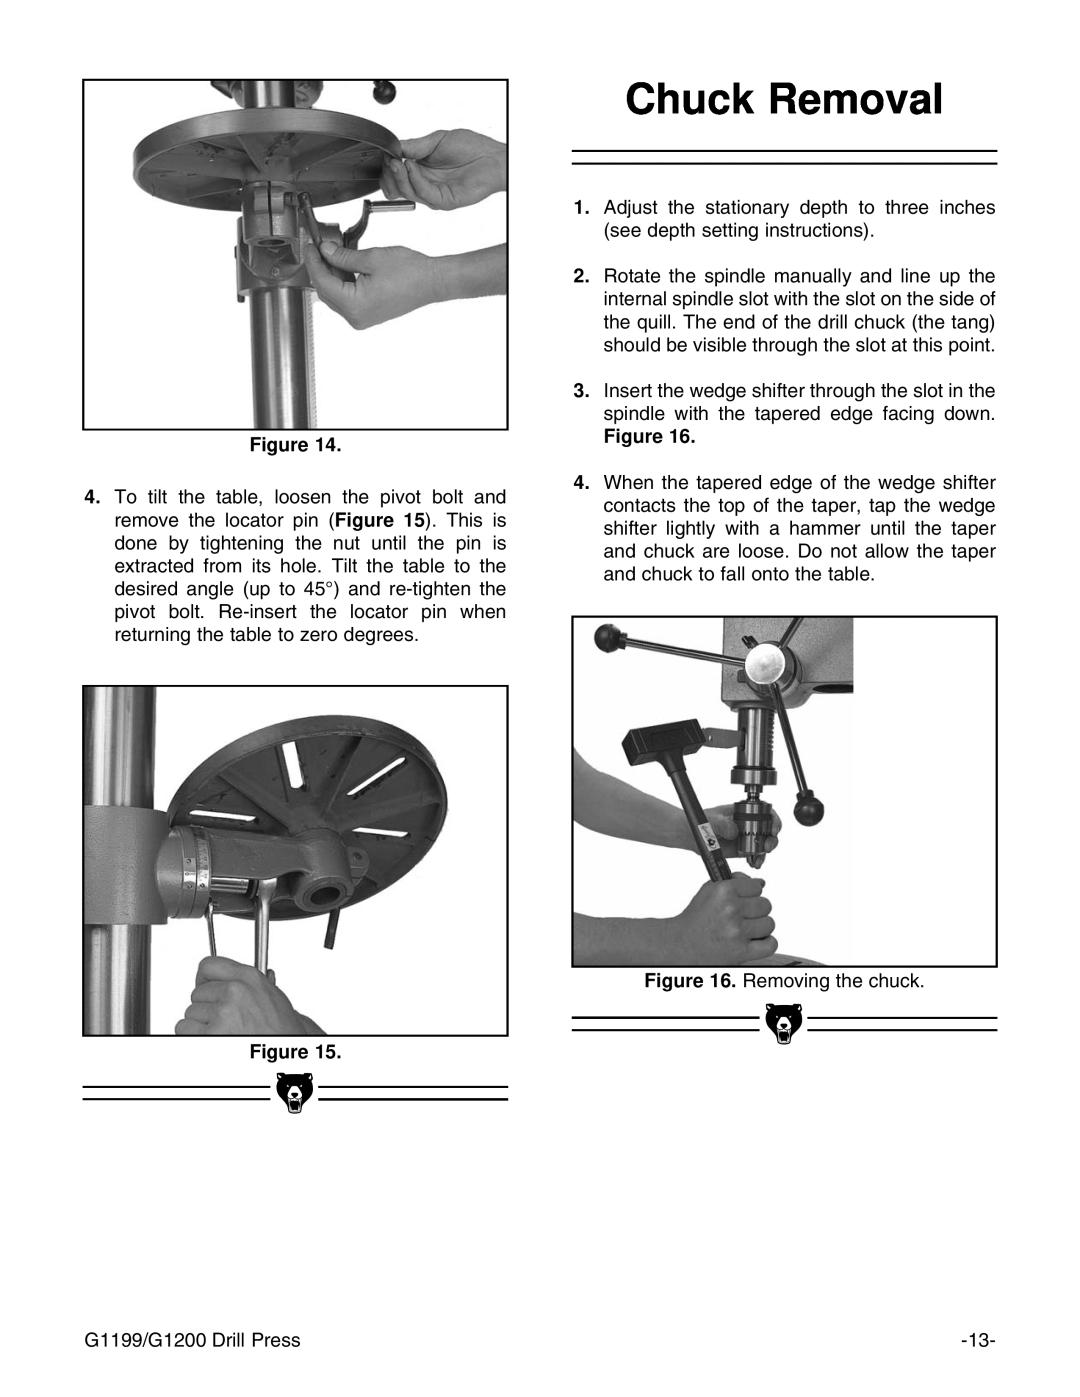 Grizzly G1200, G1199 instruction manual Chuck Removal 